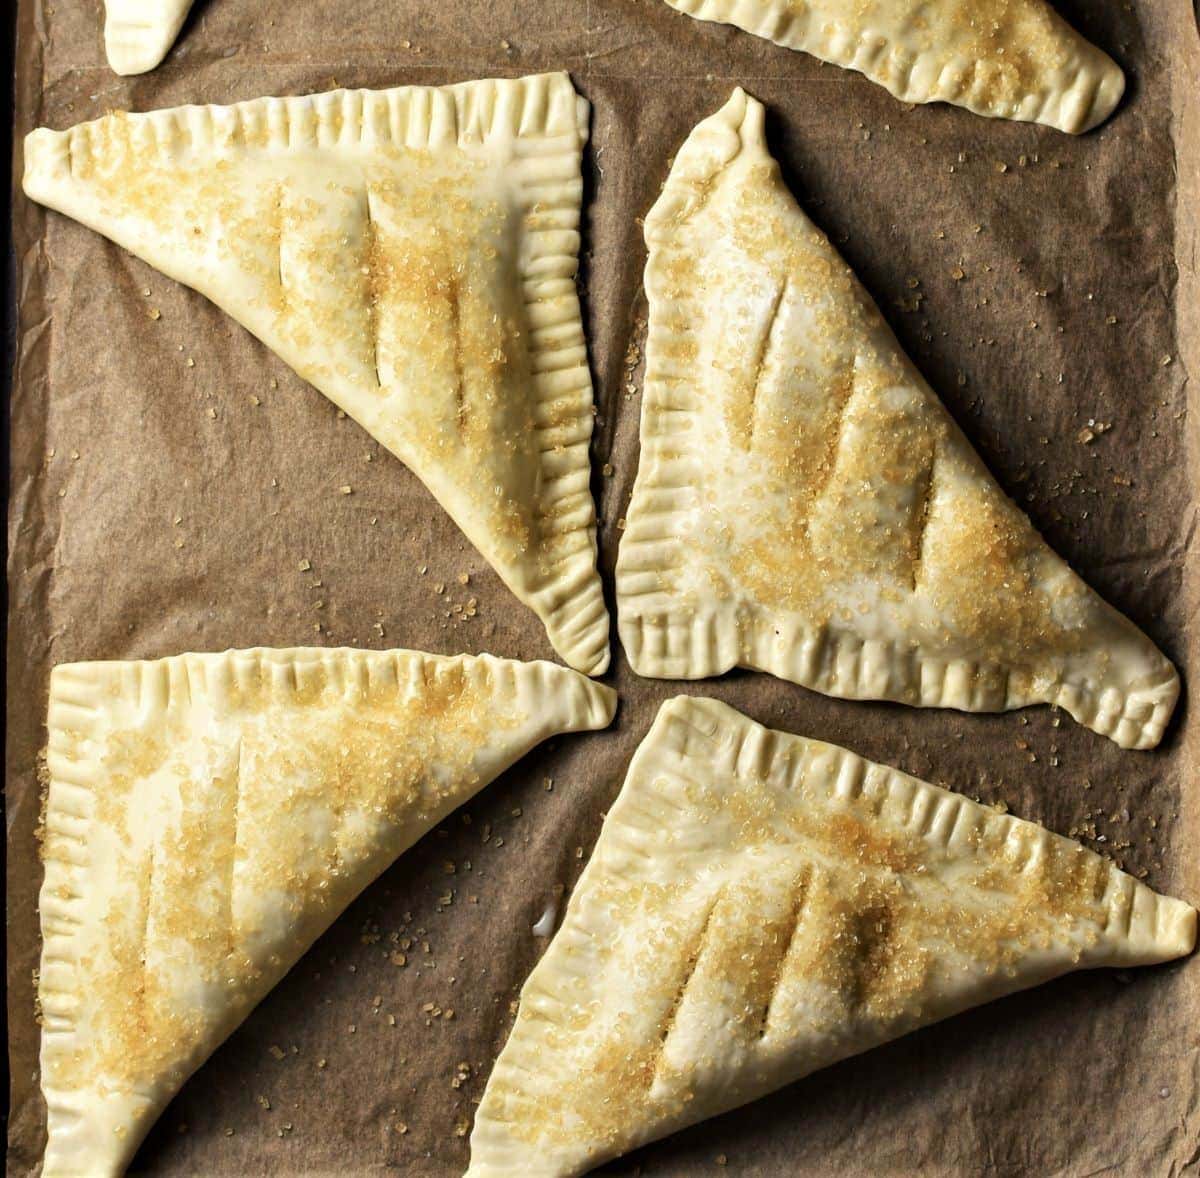 Unbaked turnovers on top of parchment.